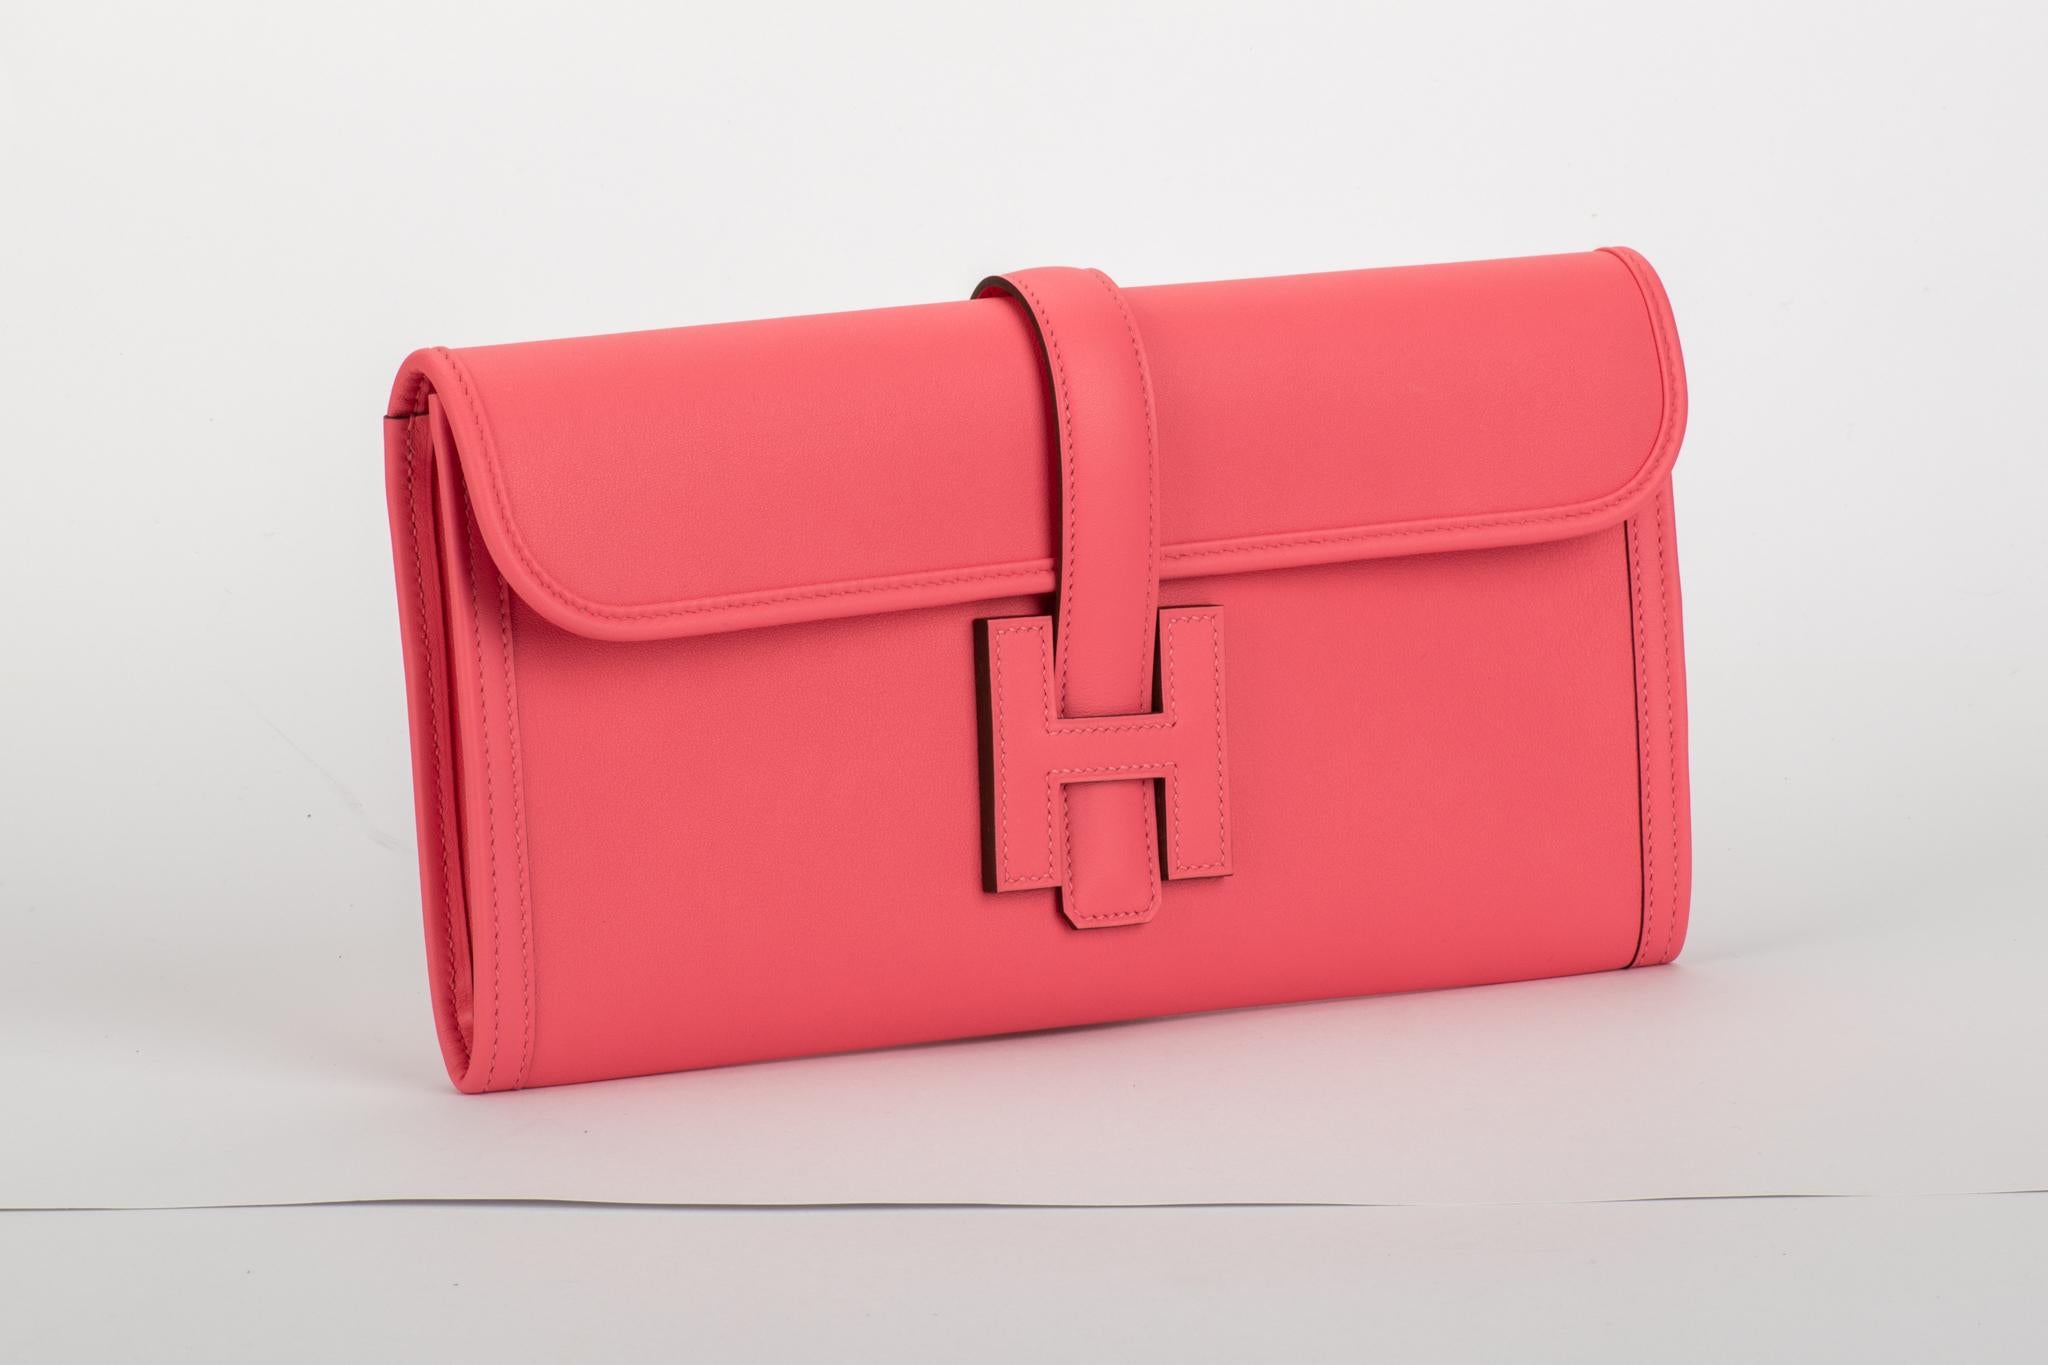 New in the box, Hermes jige elan 29cm in rare color rose azalee in swift leather. Dated 